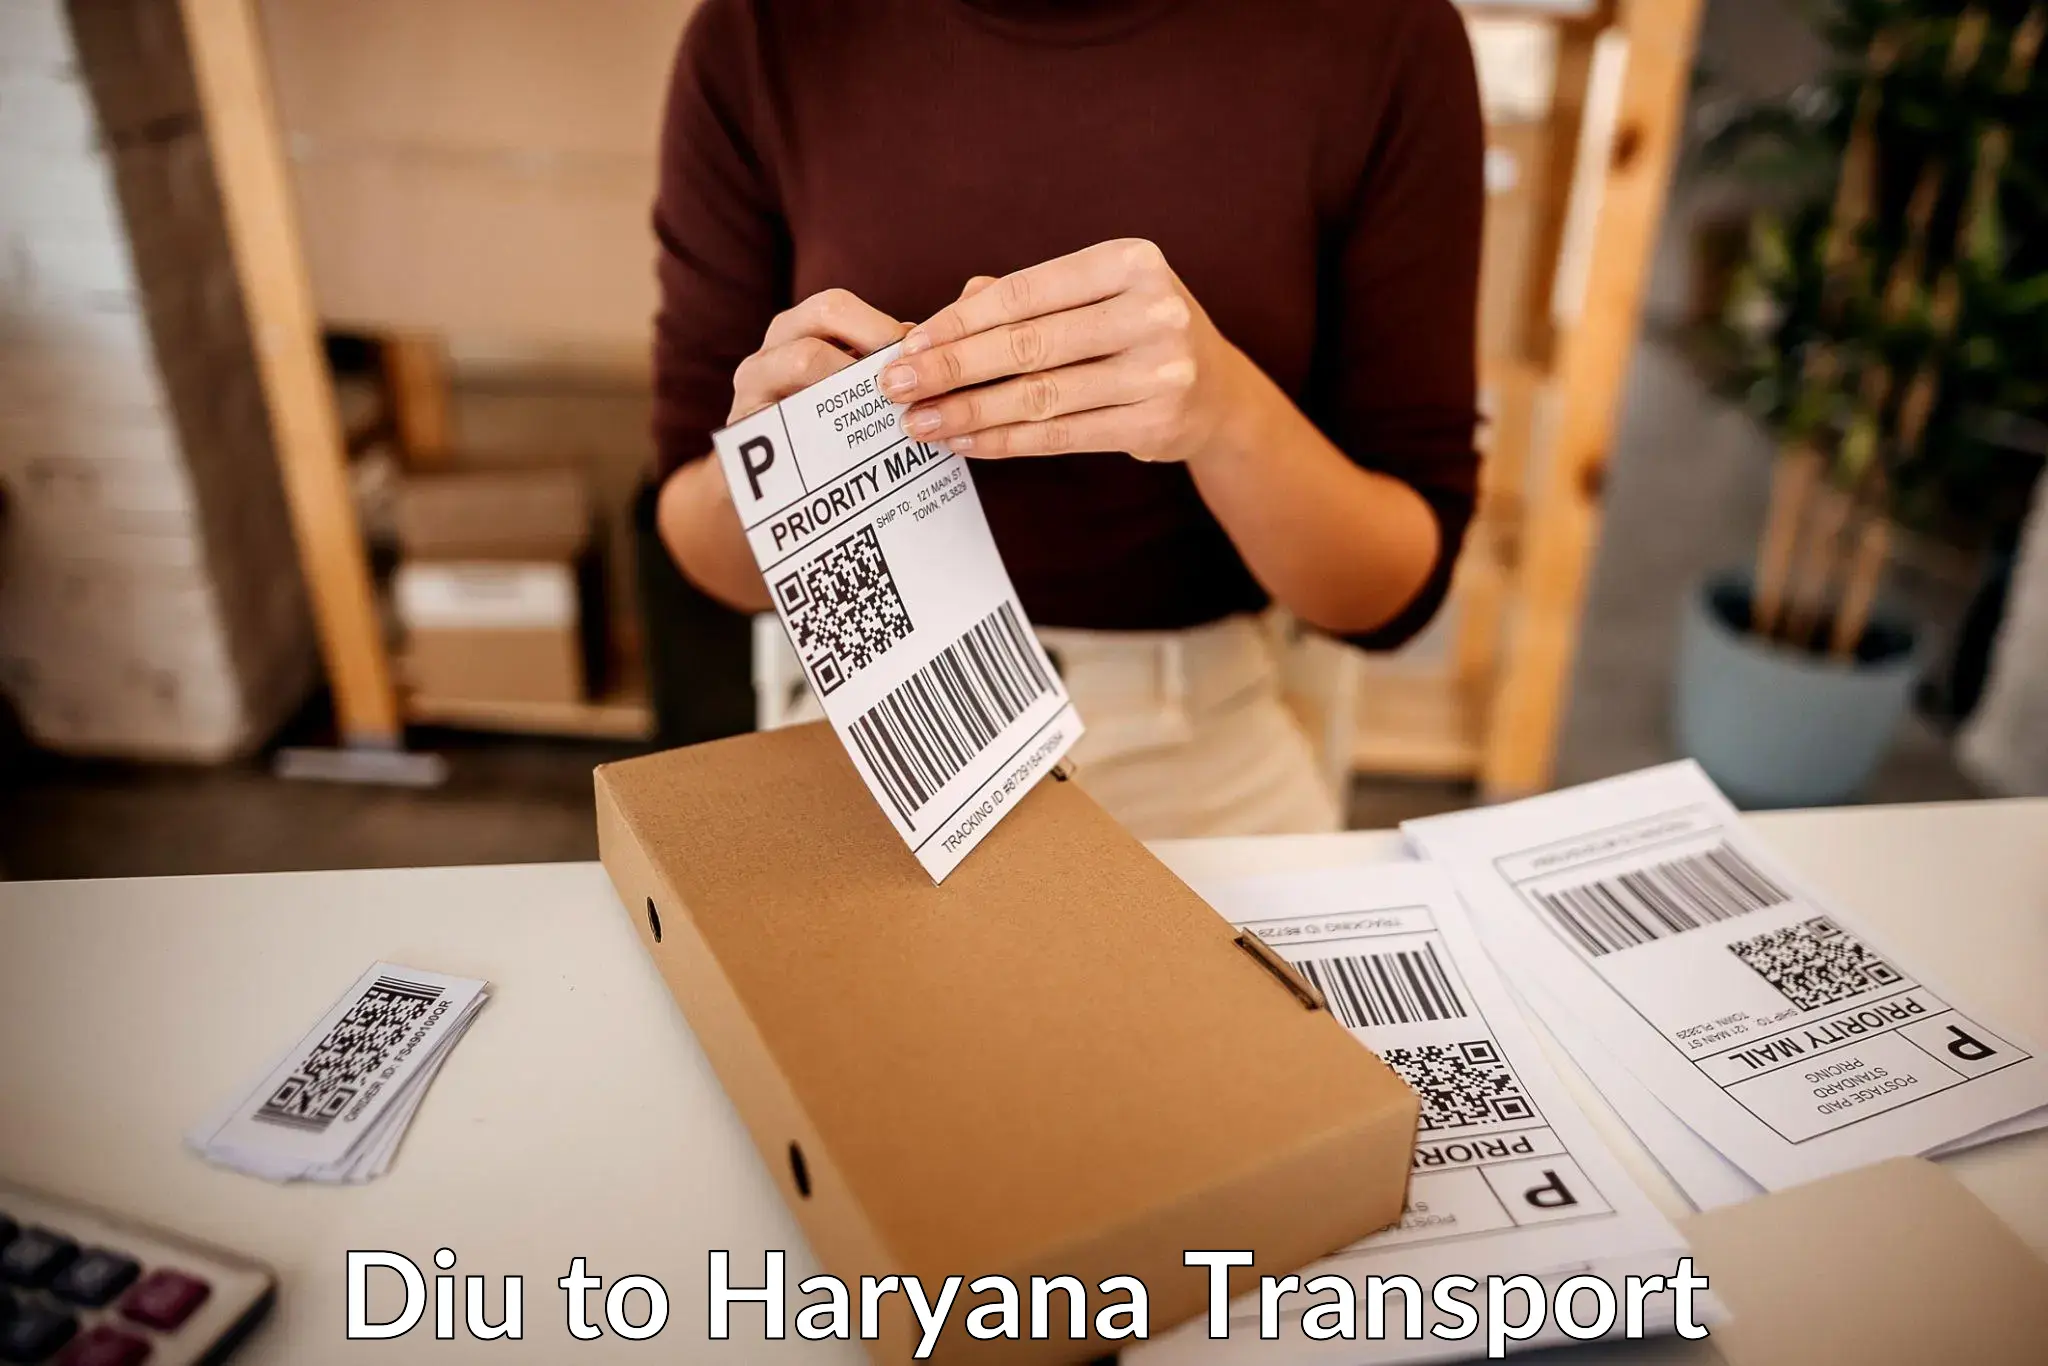 Transport bike from one state to another Diu to Haryana